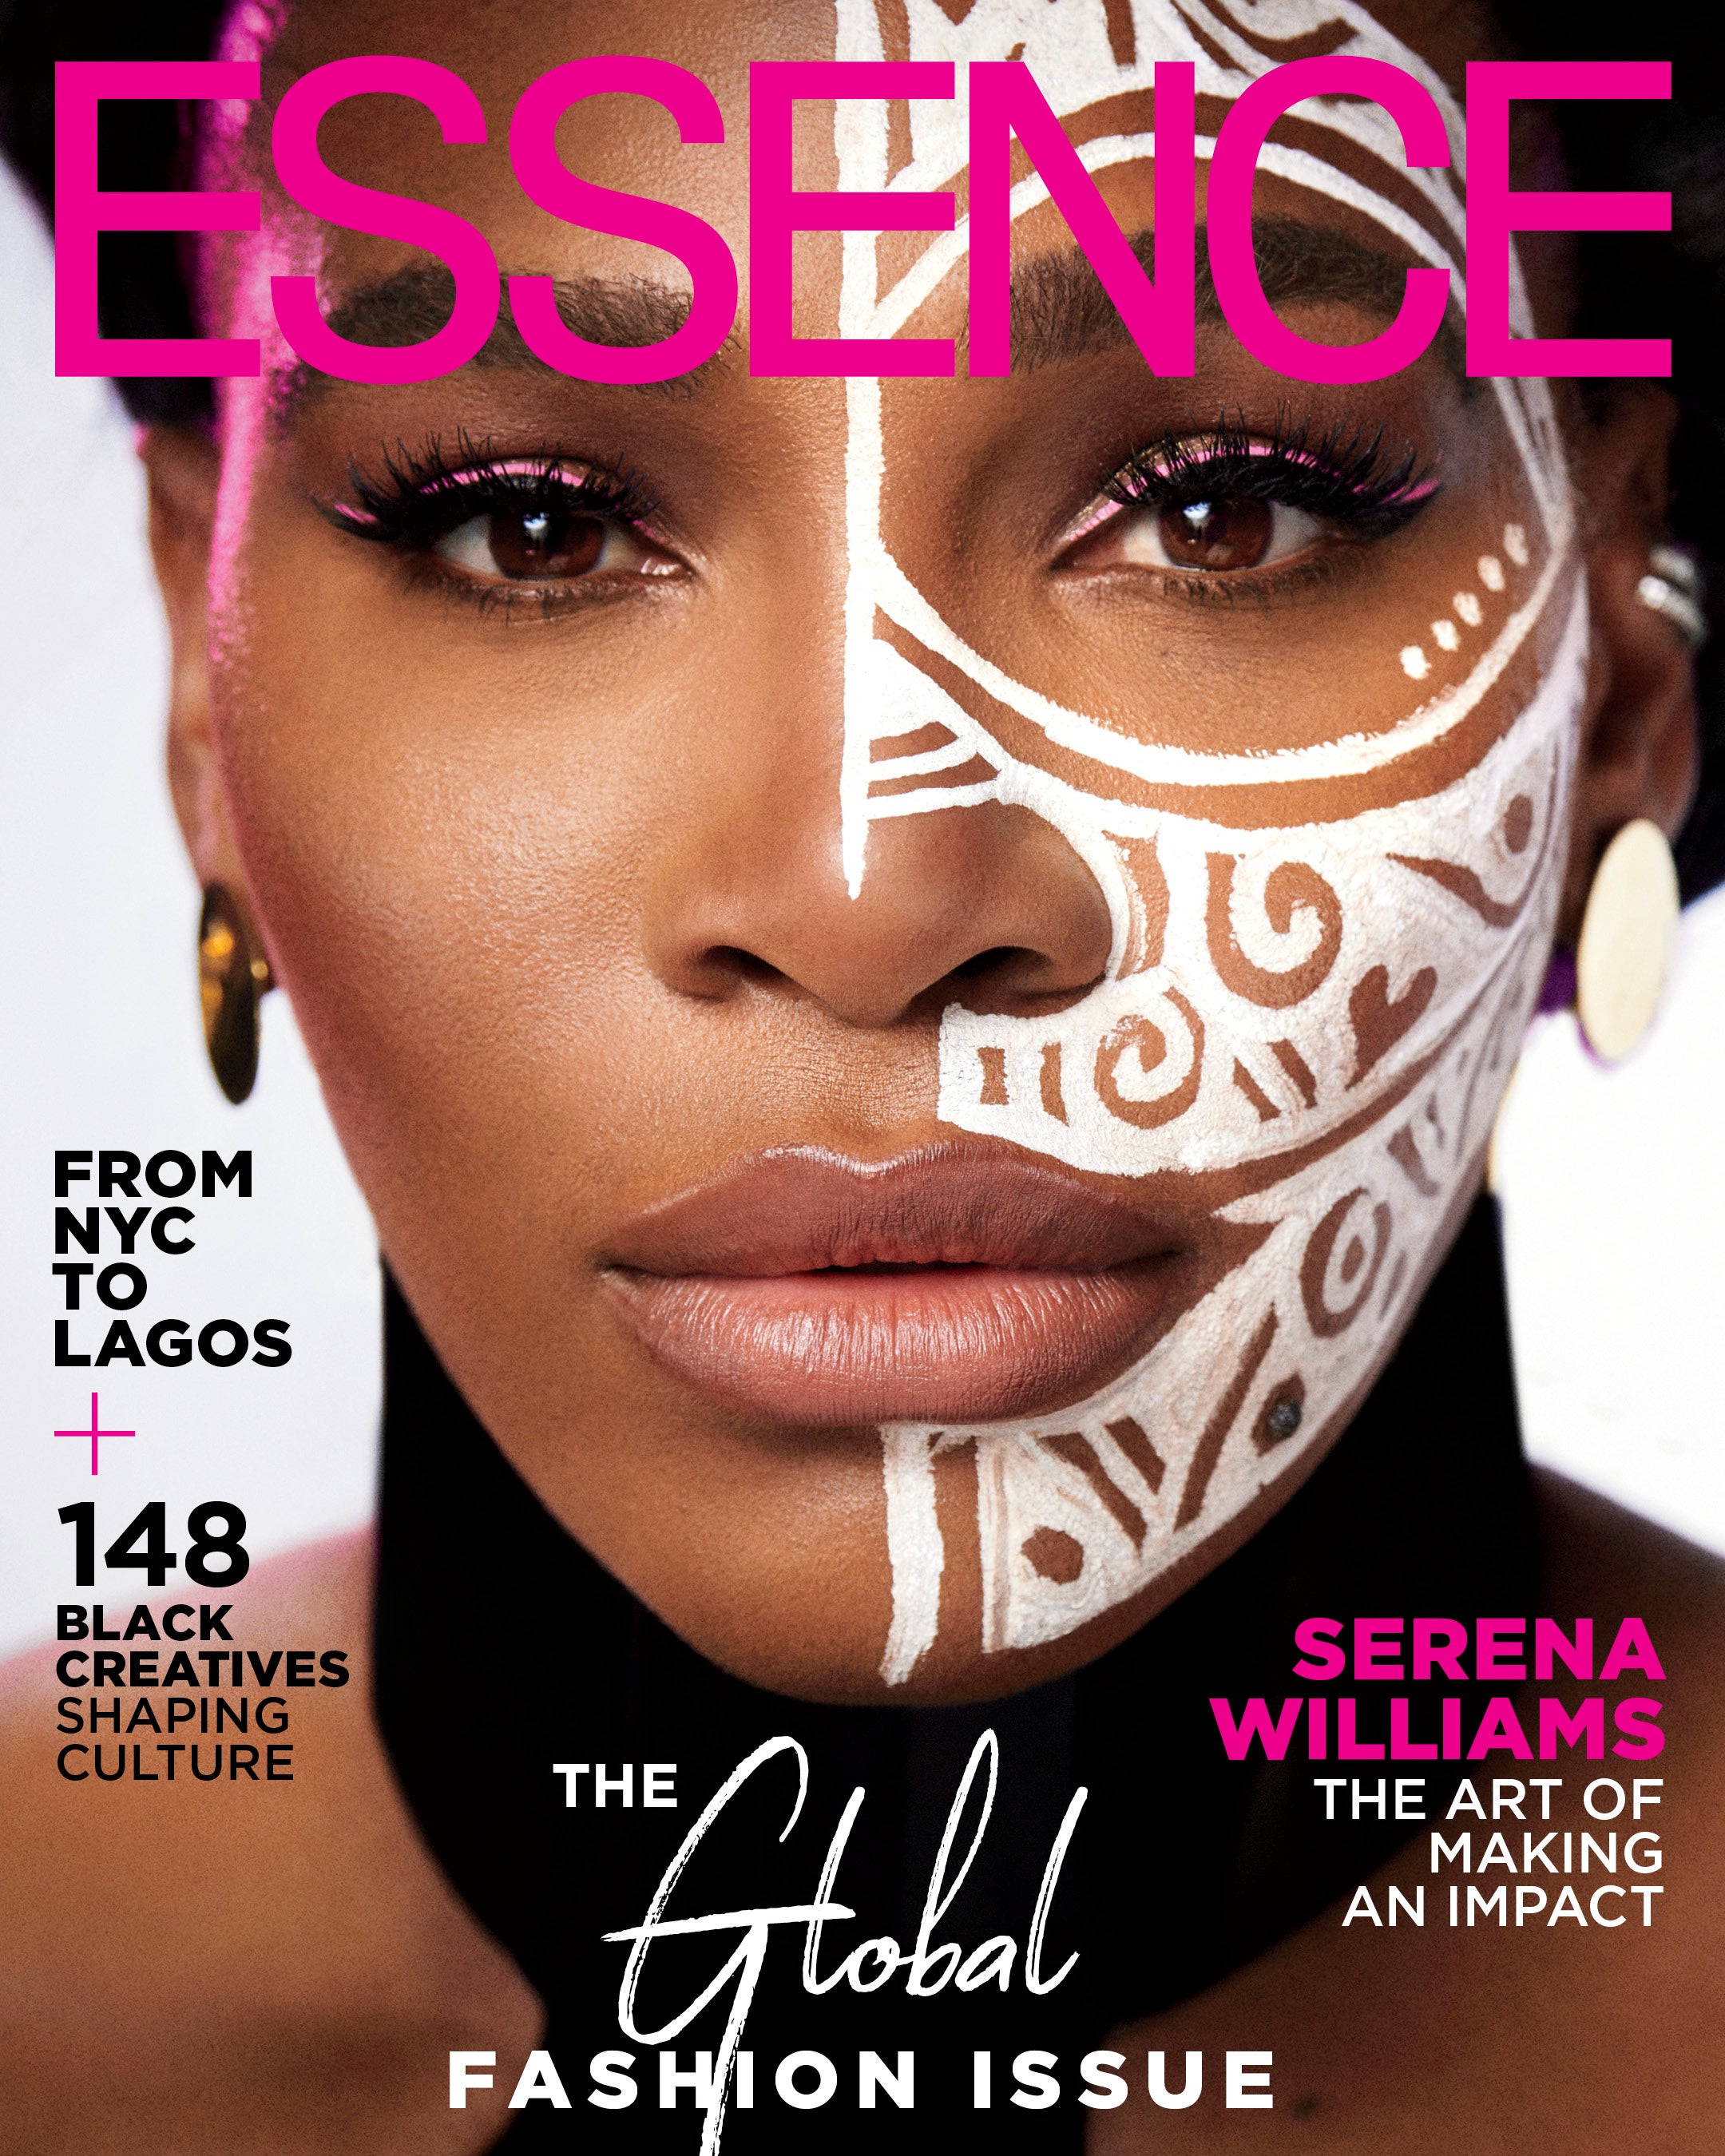 ESSENCE Launches September’s Global Fashion Issue With Fresh New Re-Design